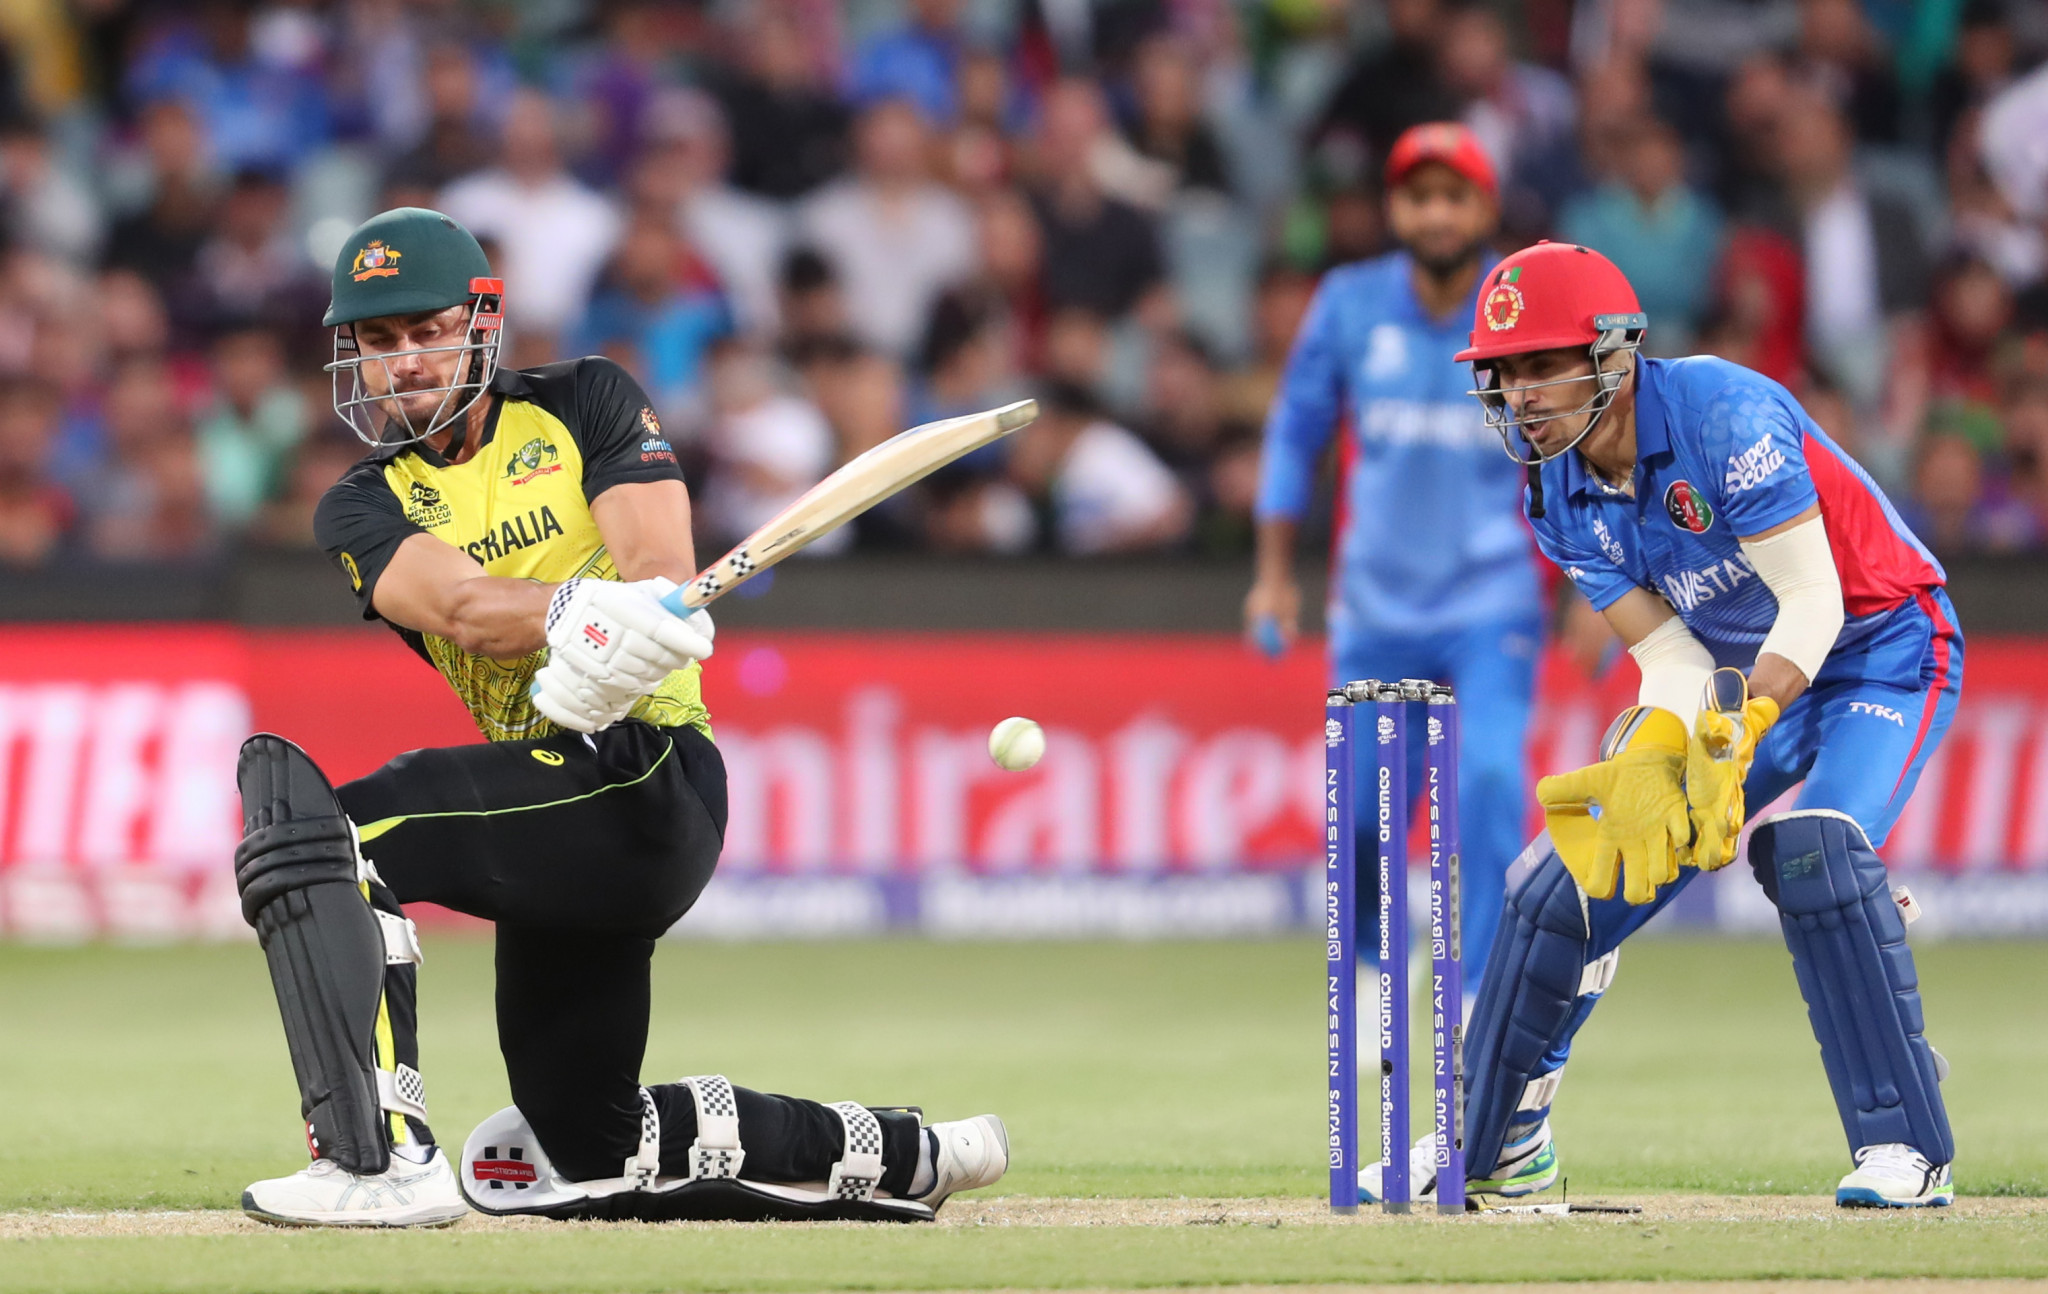 Australia pull out of ODI series against Afghanistan due to Taliban's latest restrictions on women and girls